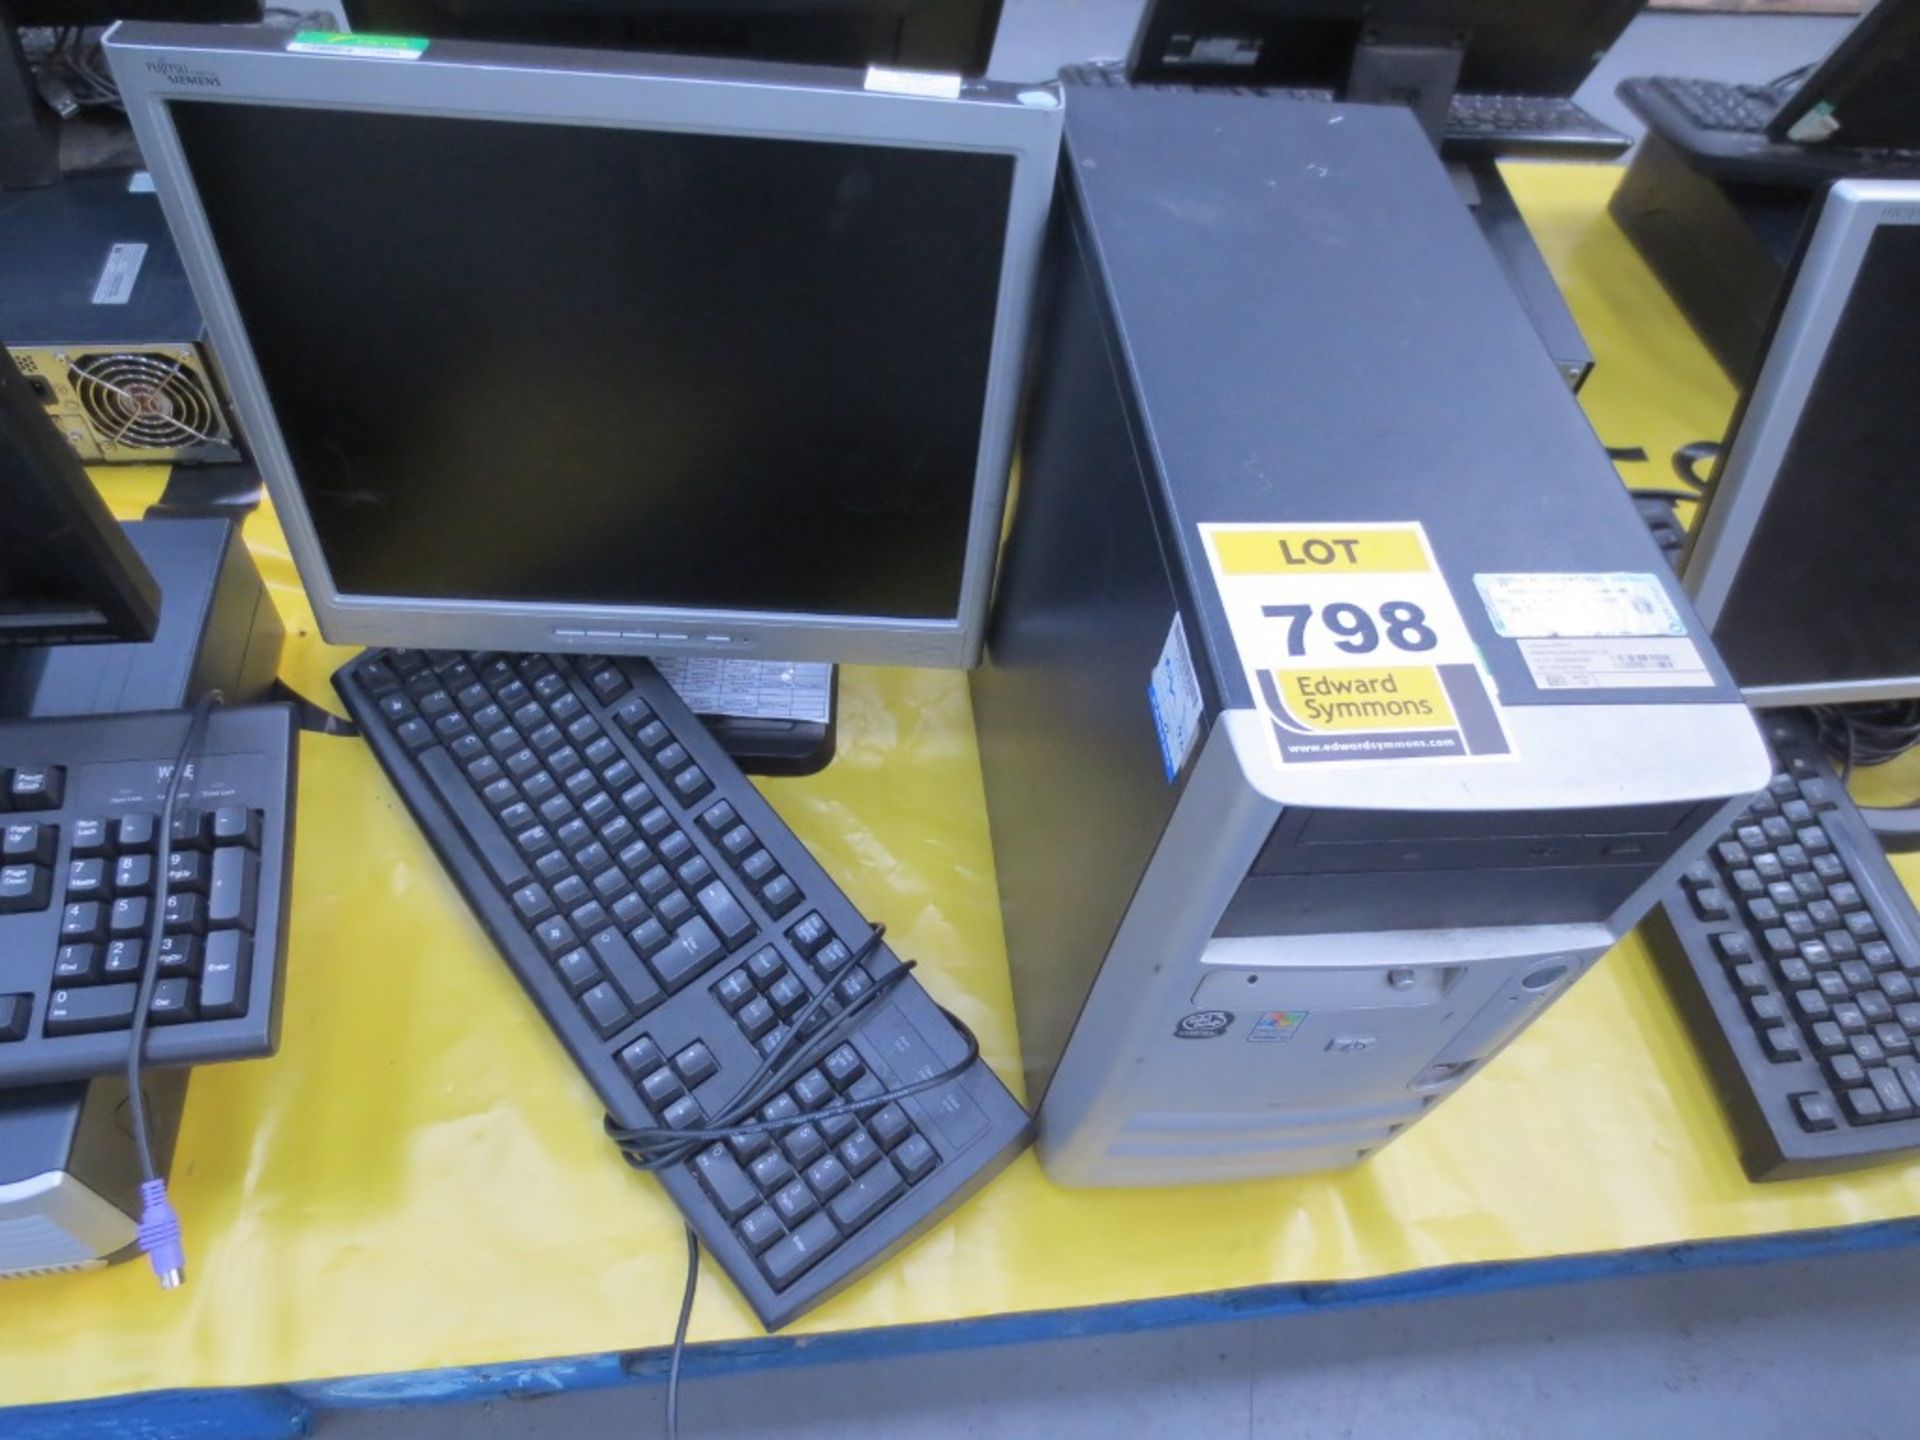 3 HP DC 230m personal computer with Celerons processor and DVD rom, 1 HP DX8100 tower personal